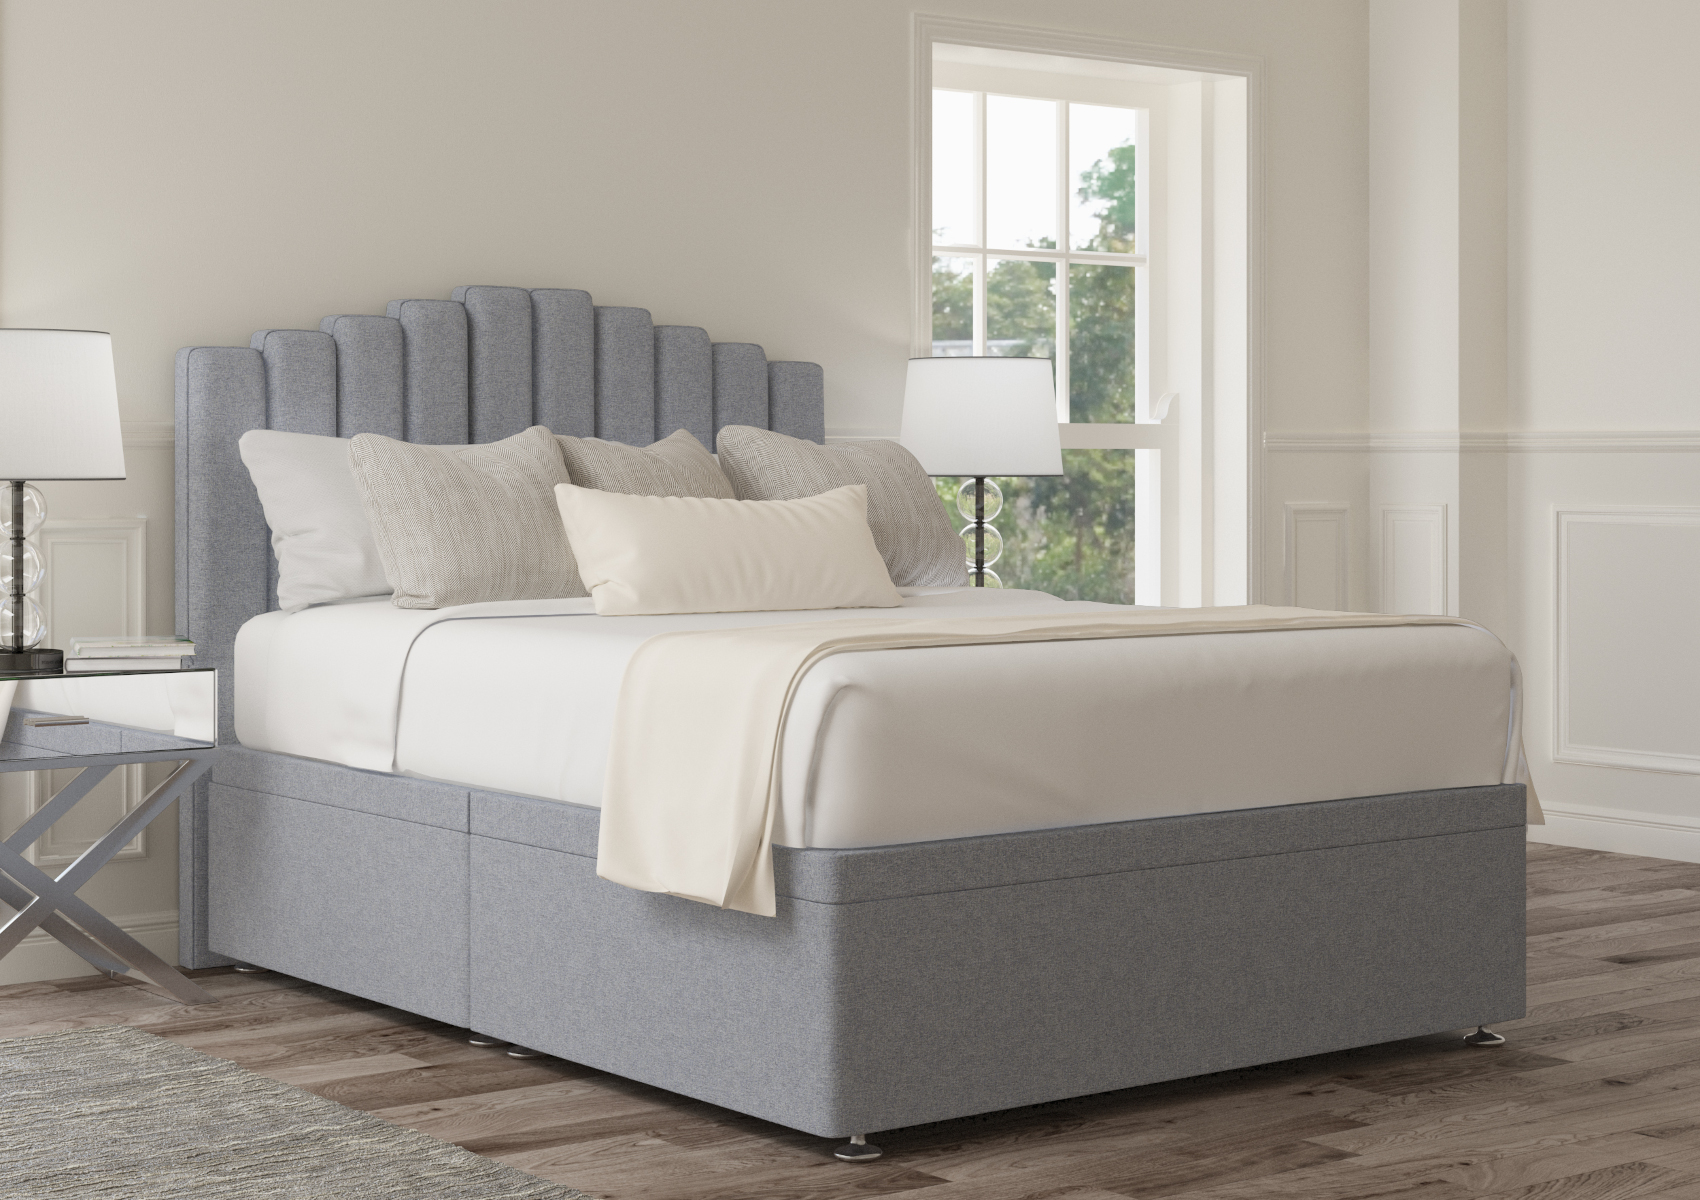 View Quinn Arran Pebble Upholstered Double Ottoman Bed Time4Sleep information